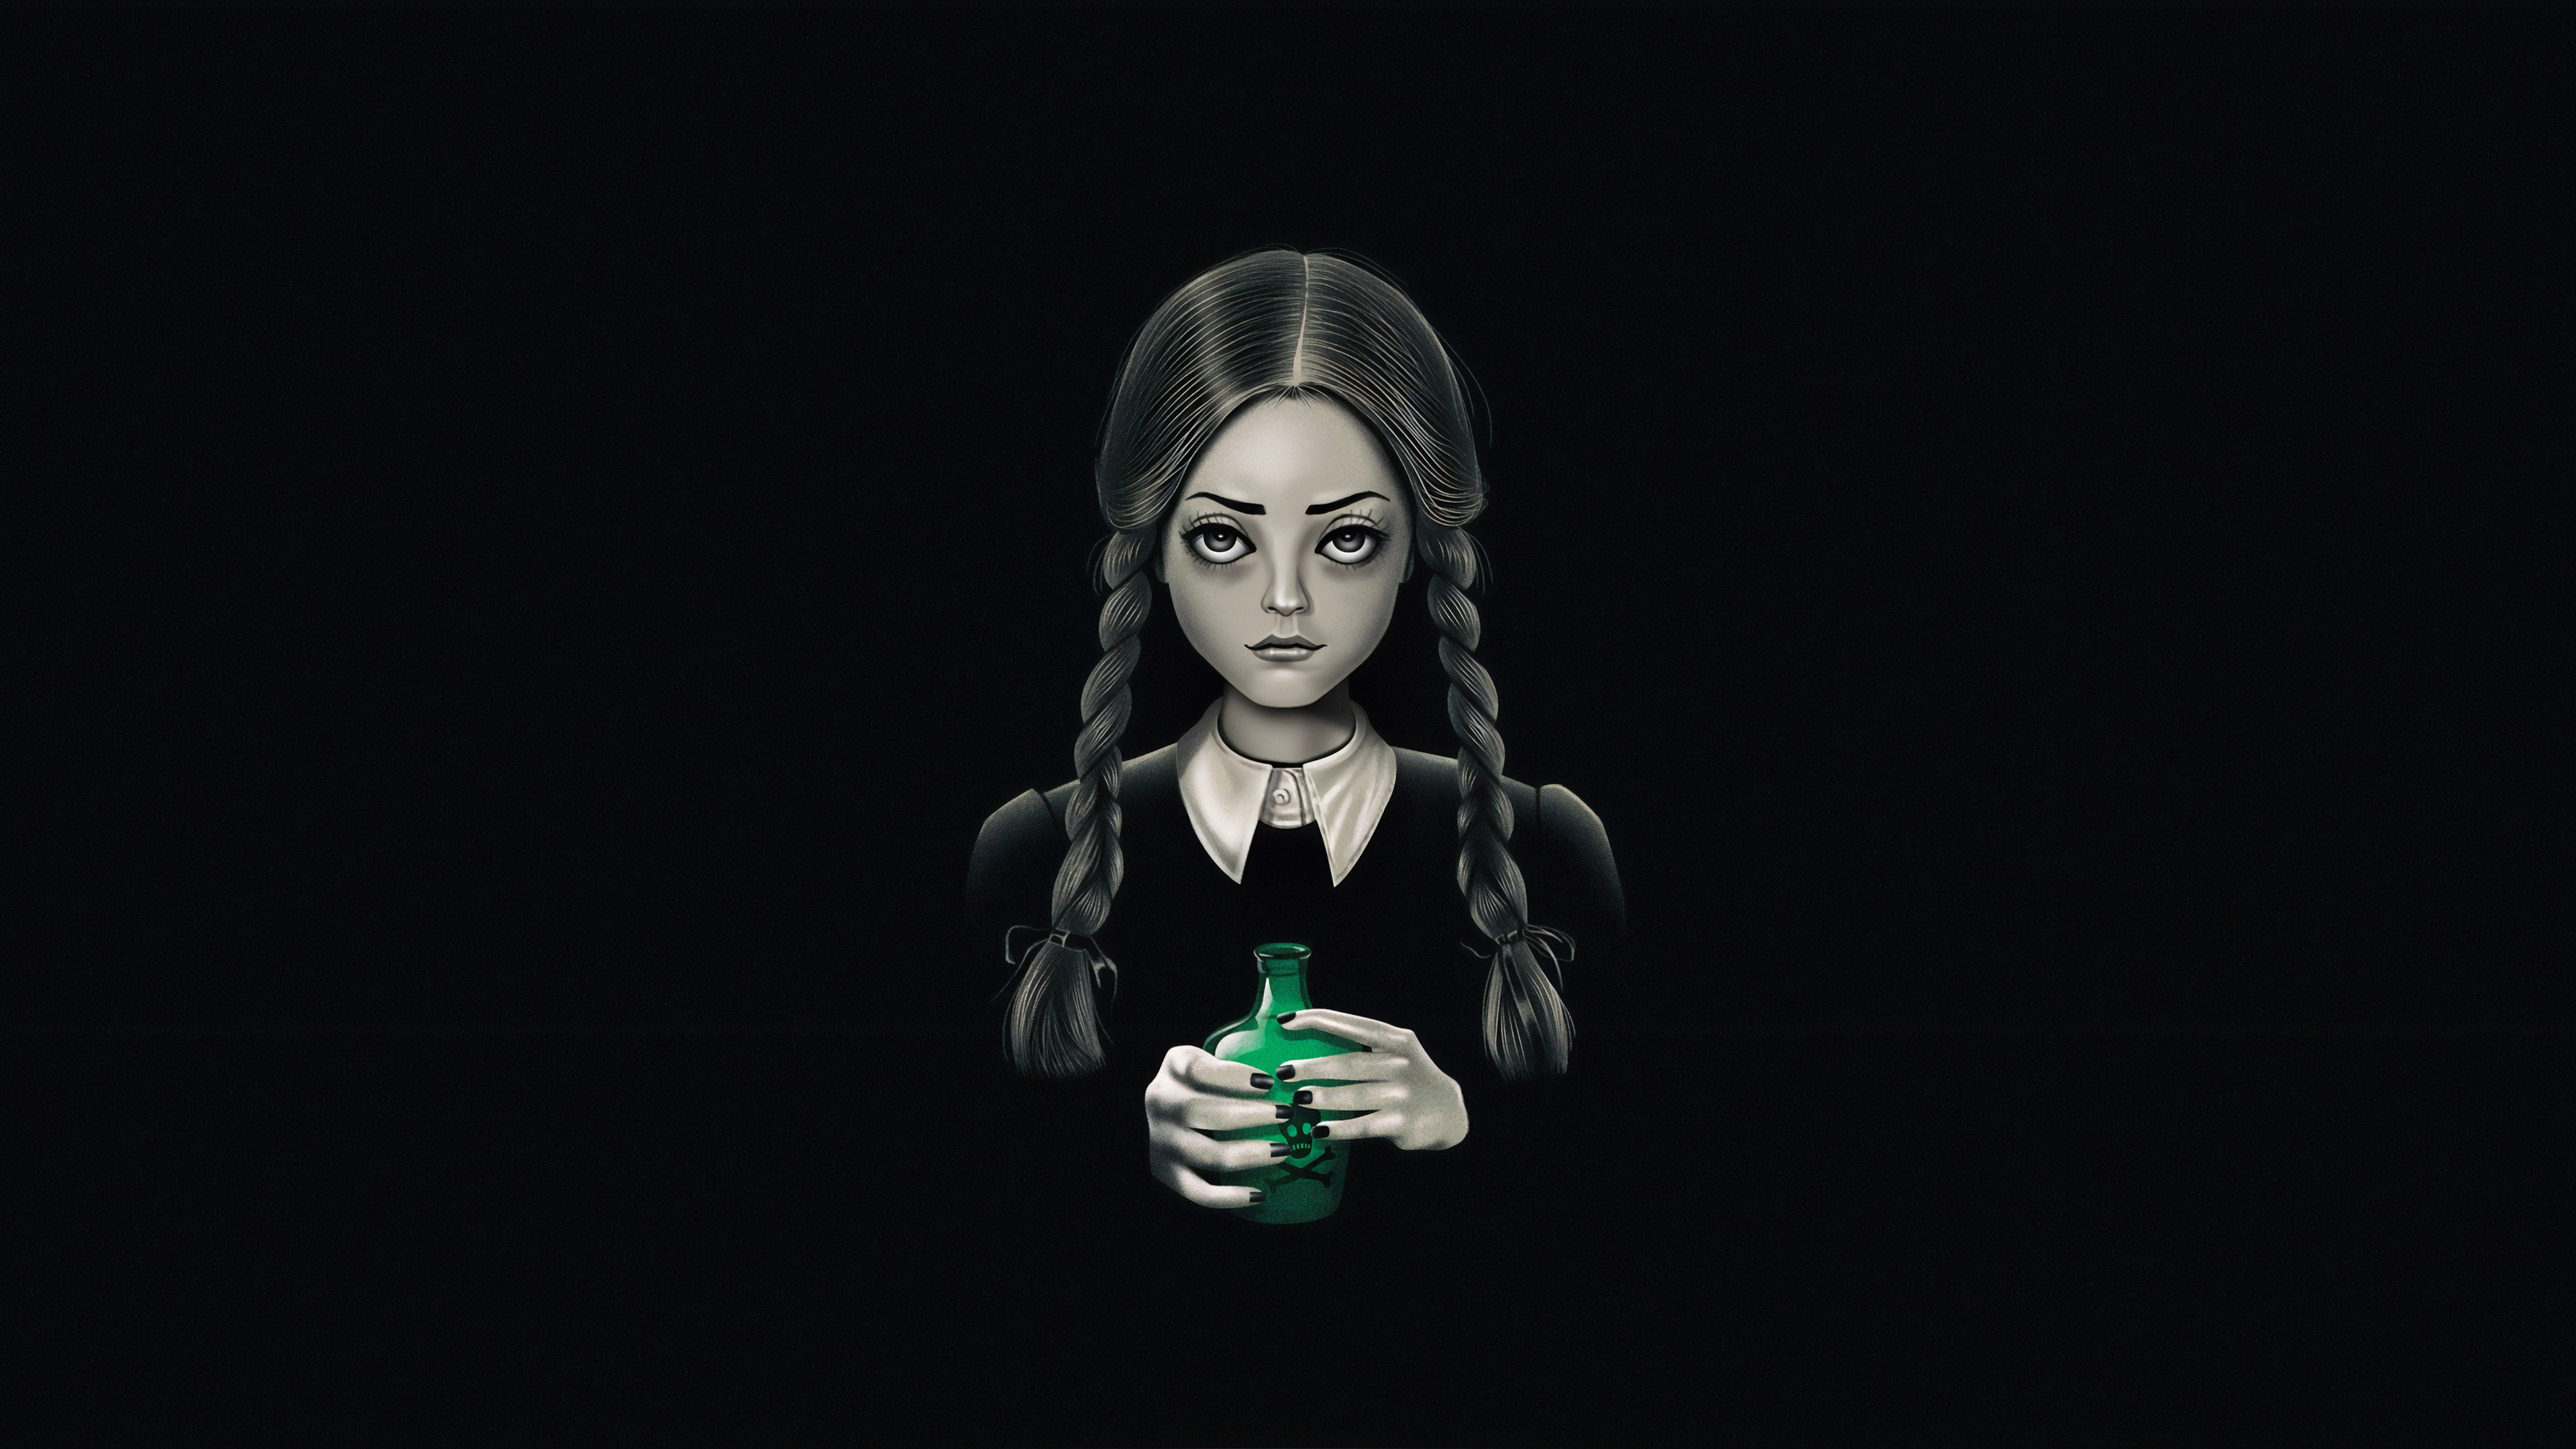 Wednesday Addams, Poisonous character, HD wallpapers, Creepy vibes, 3840x2160 4K Desktop